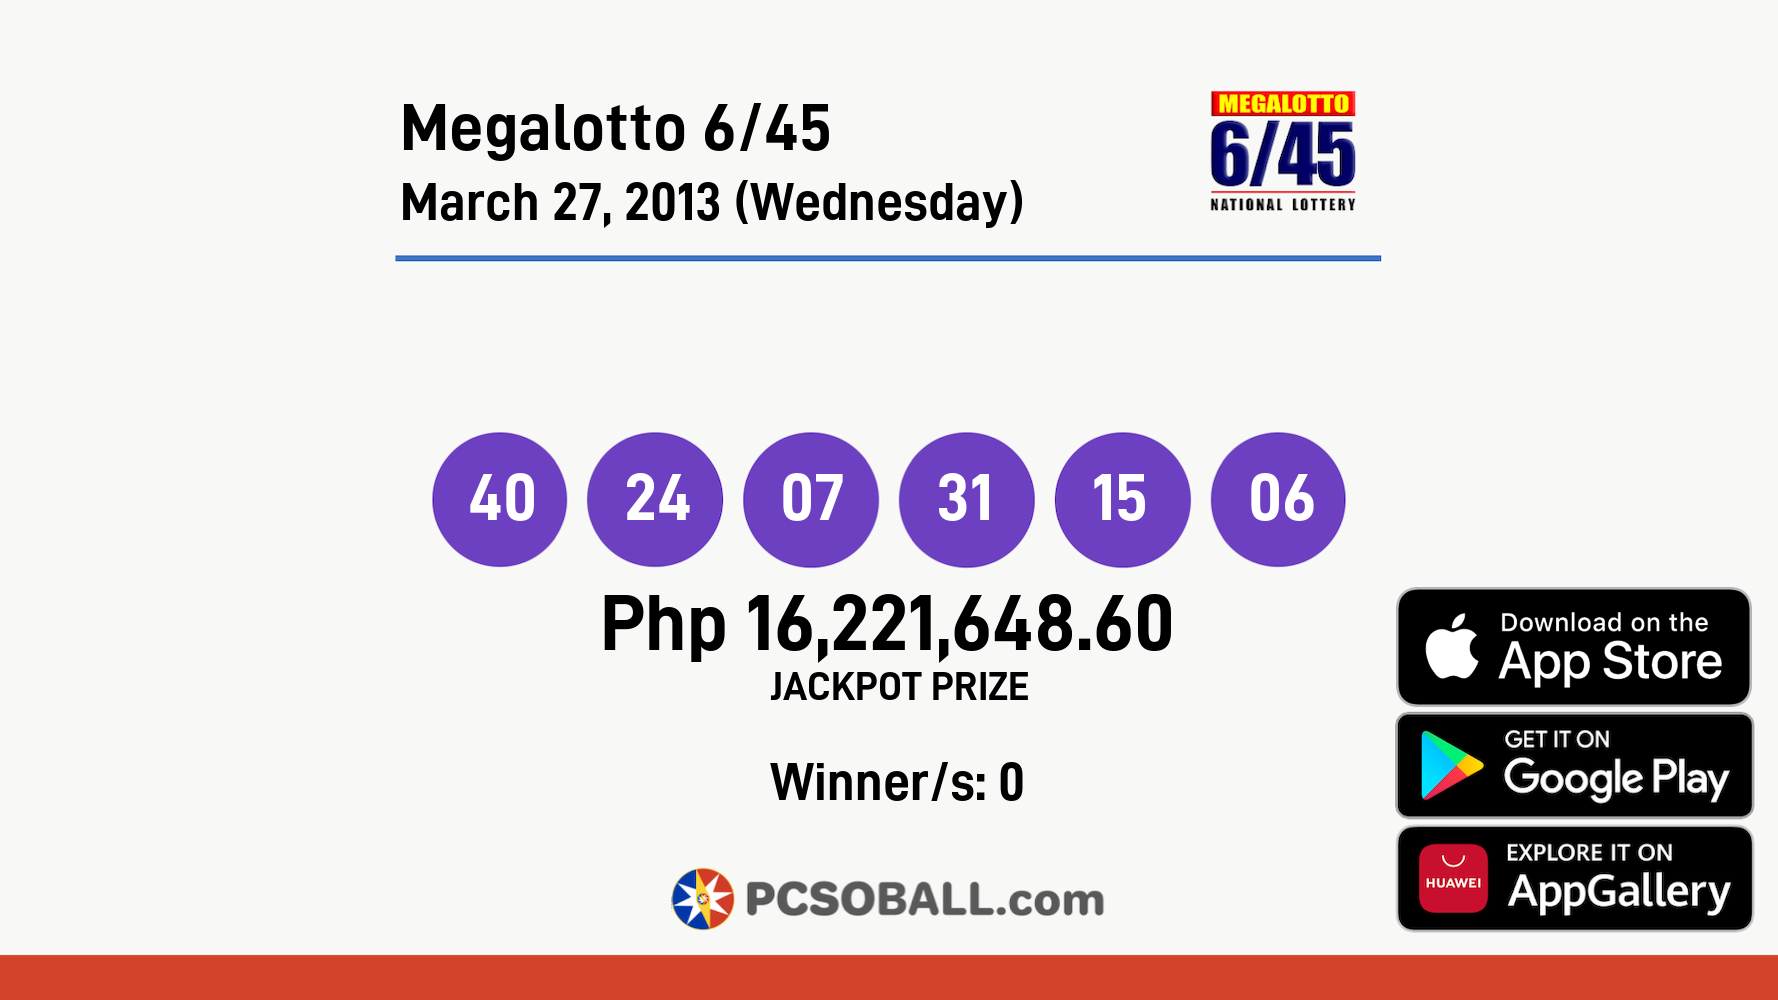 Megalotto 6/45 March 27, 2013 (Wednesday) Result